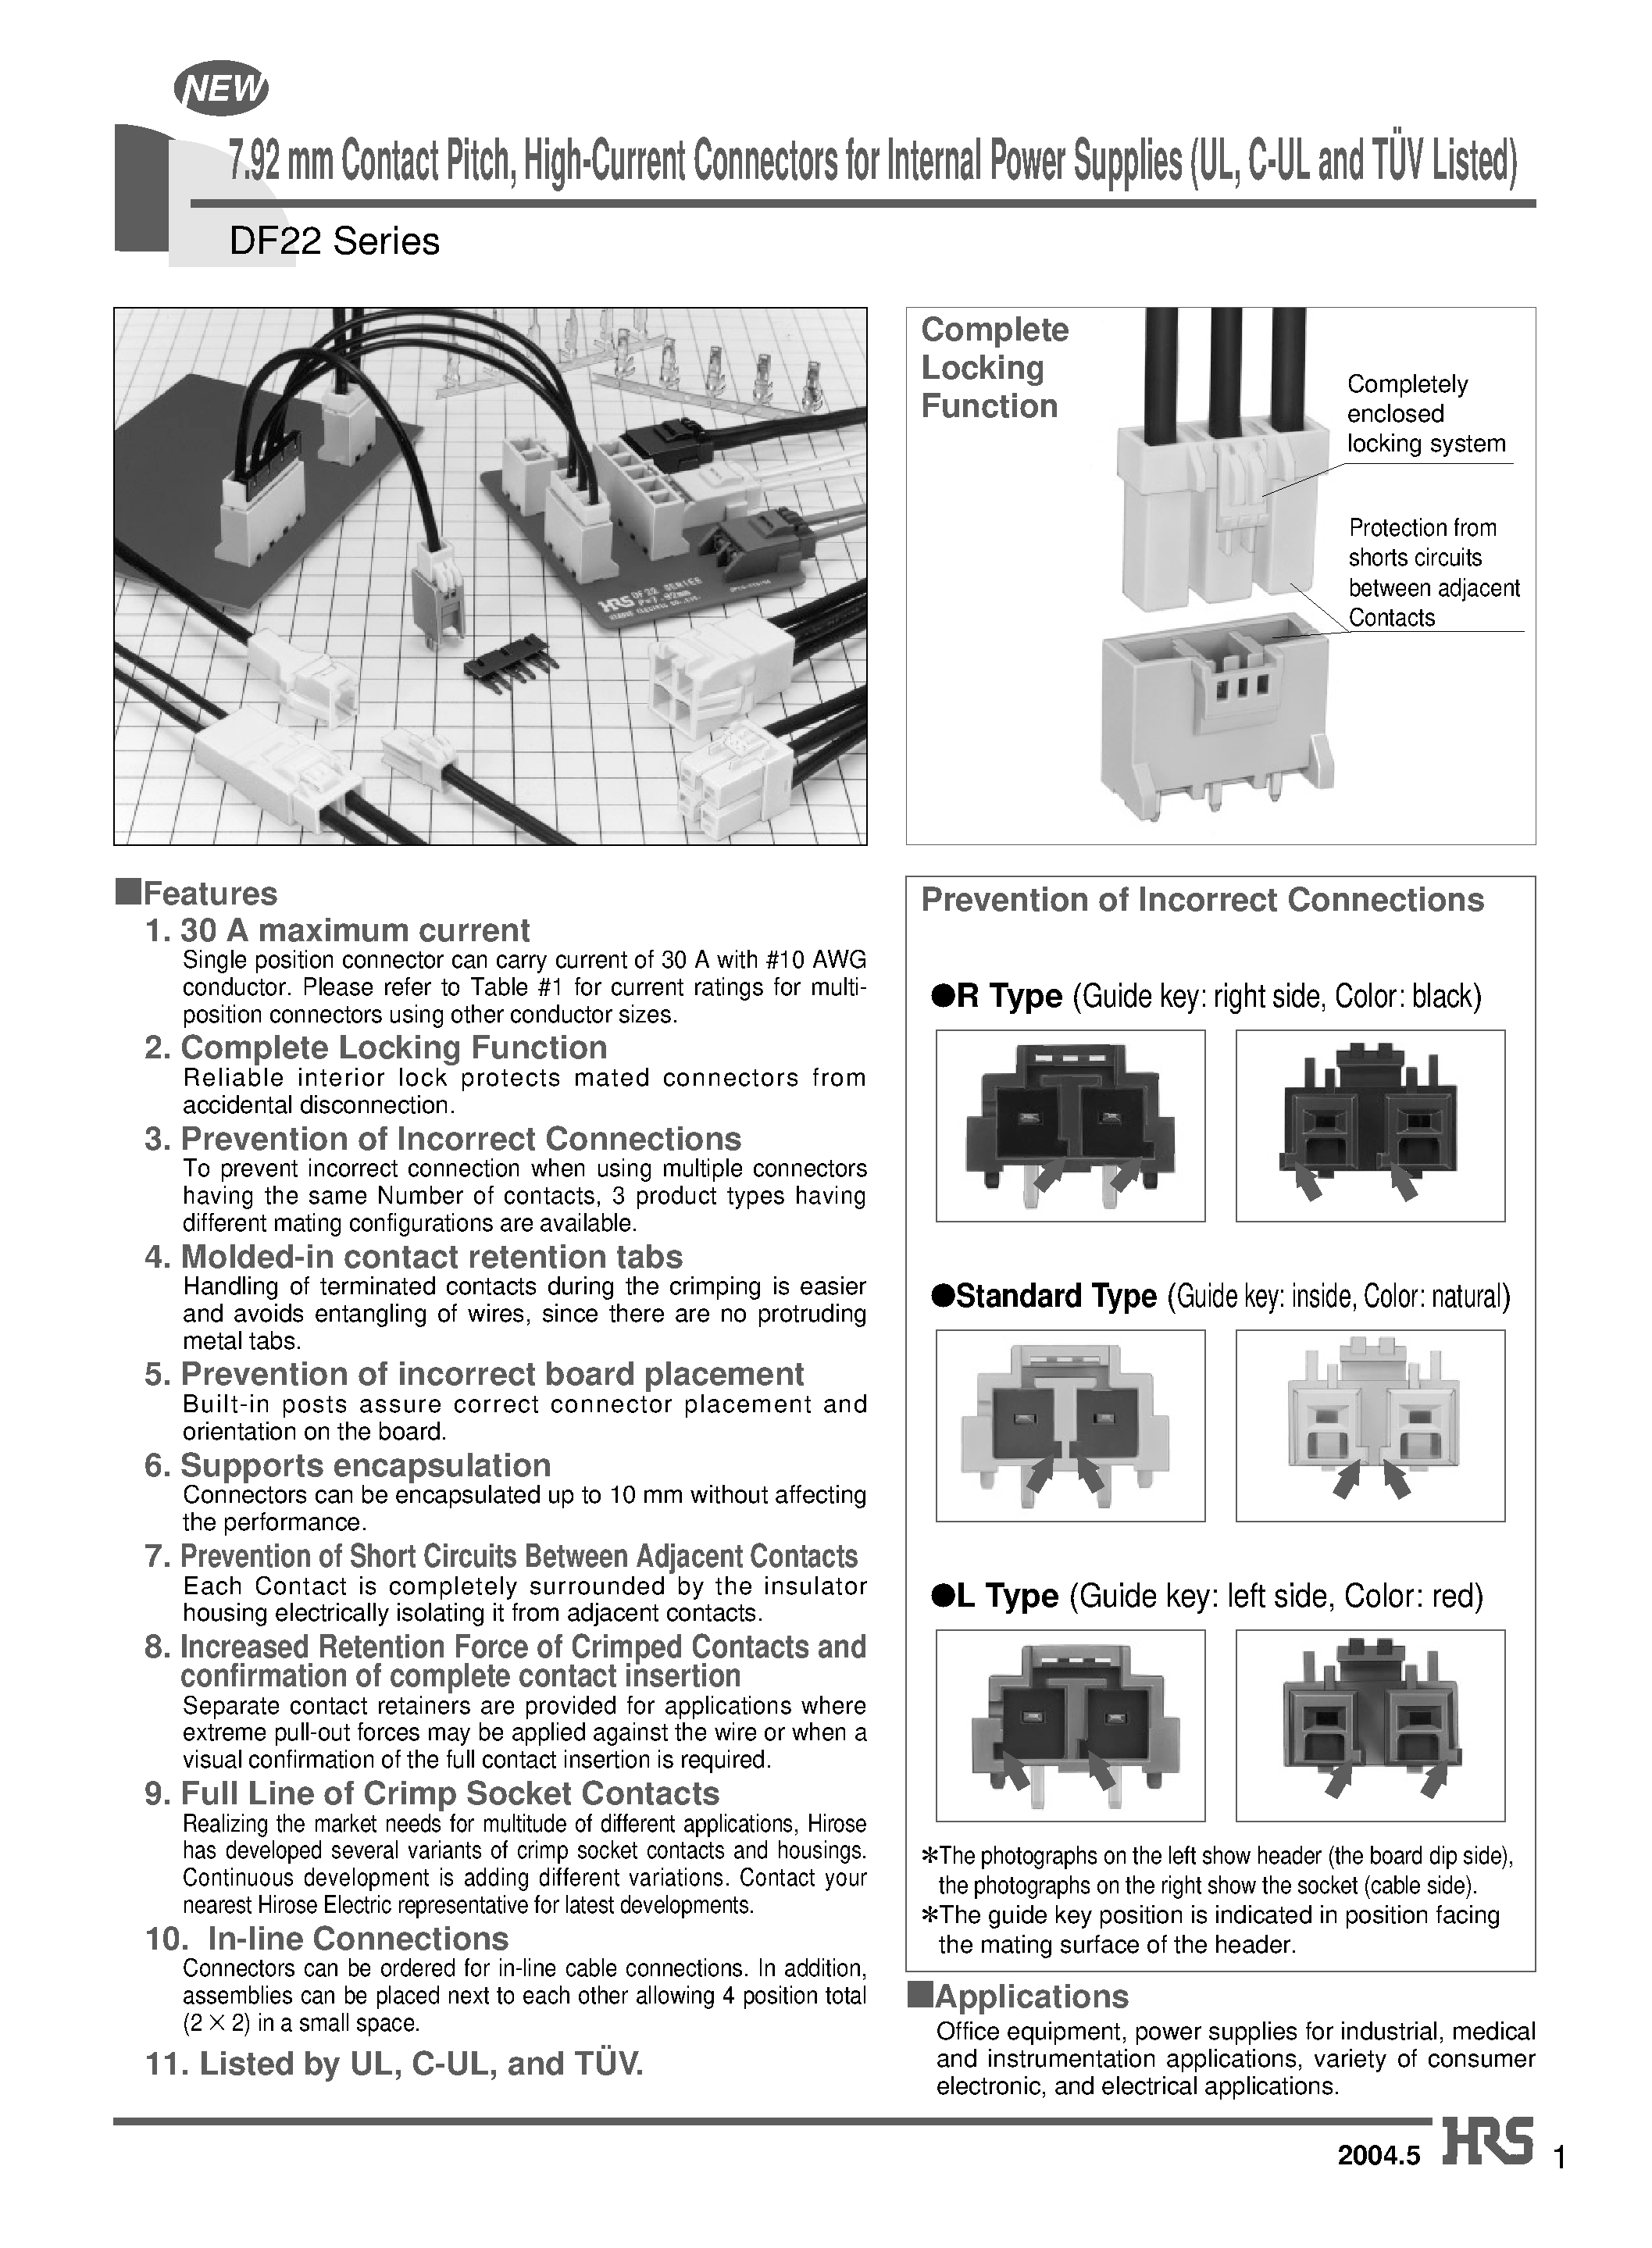 Datasheet DF22-4S-7.92DSA - 7.92 mm Contact Pitch/ High-Current Connectors for Internal Power Supplies (UL/ C-UL and TUV Listed) page 1